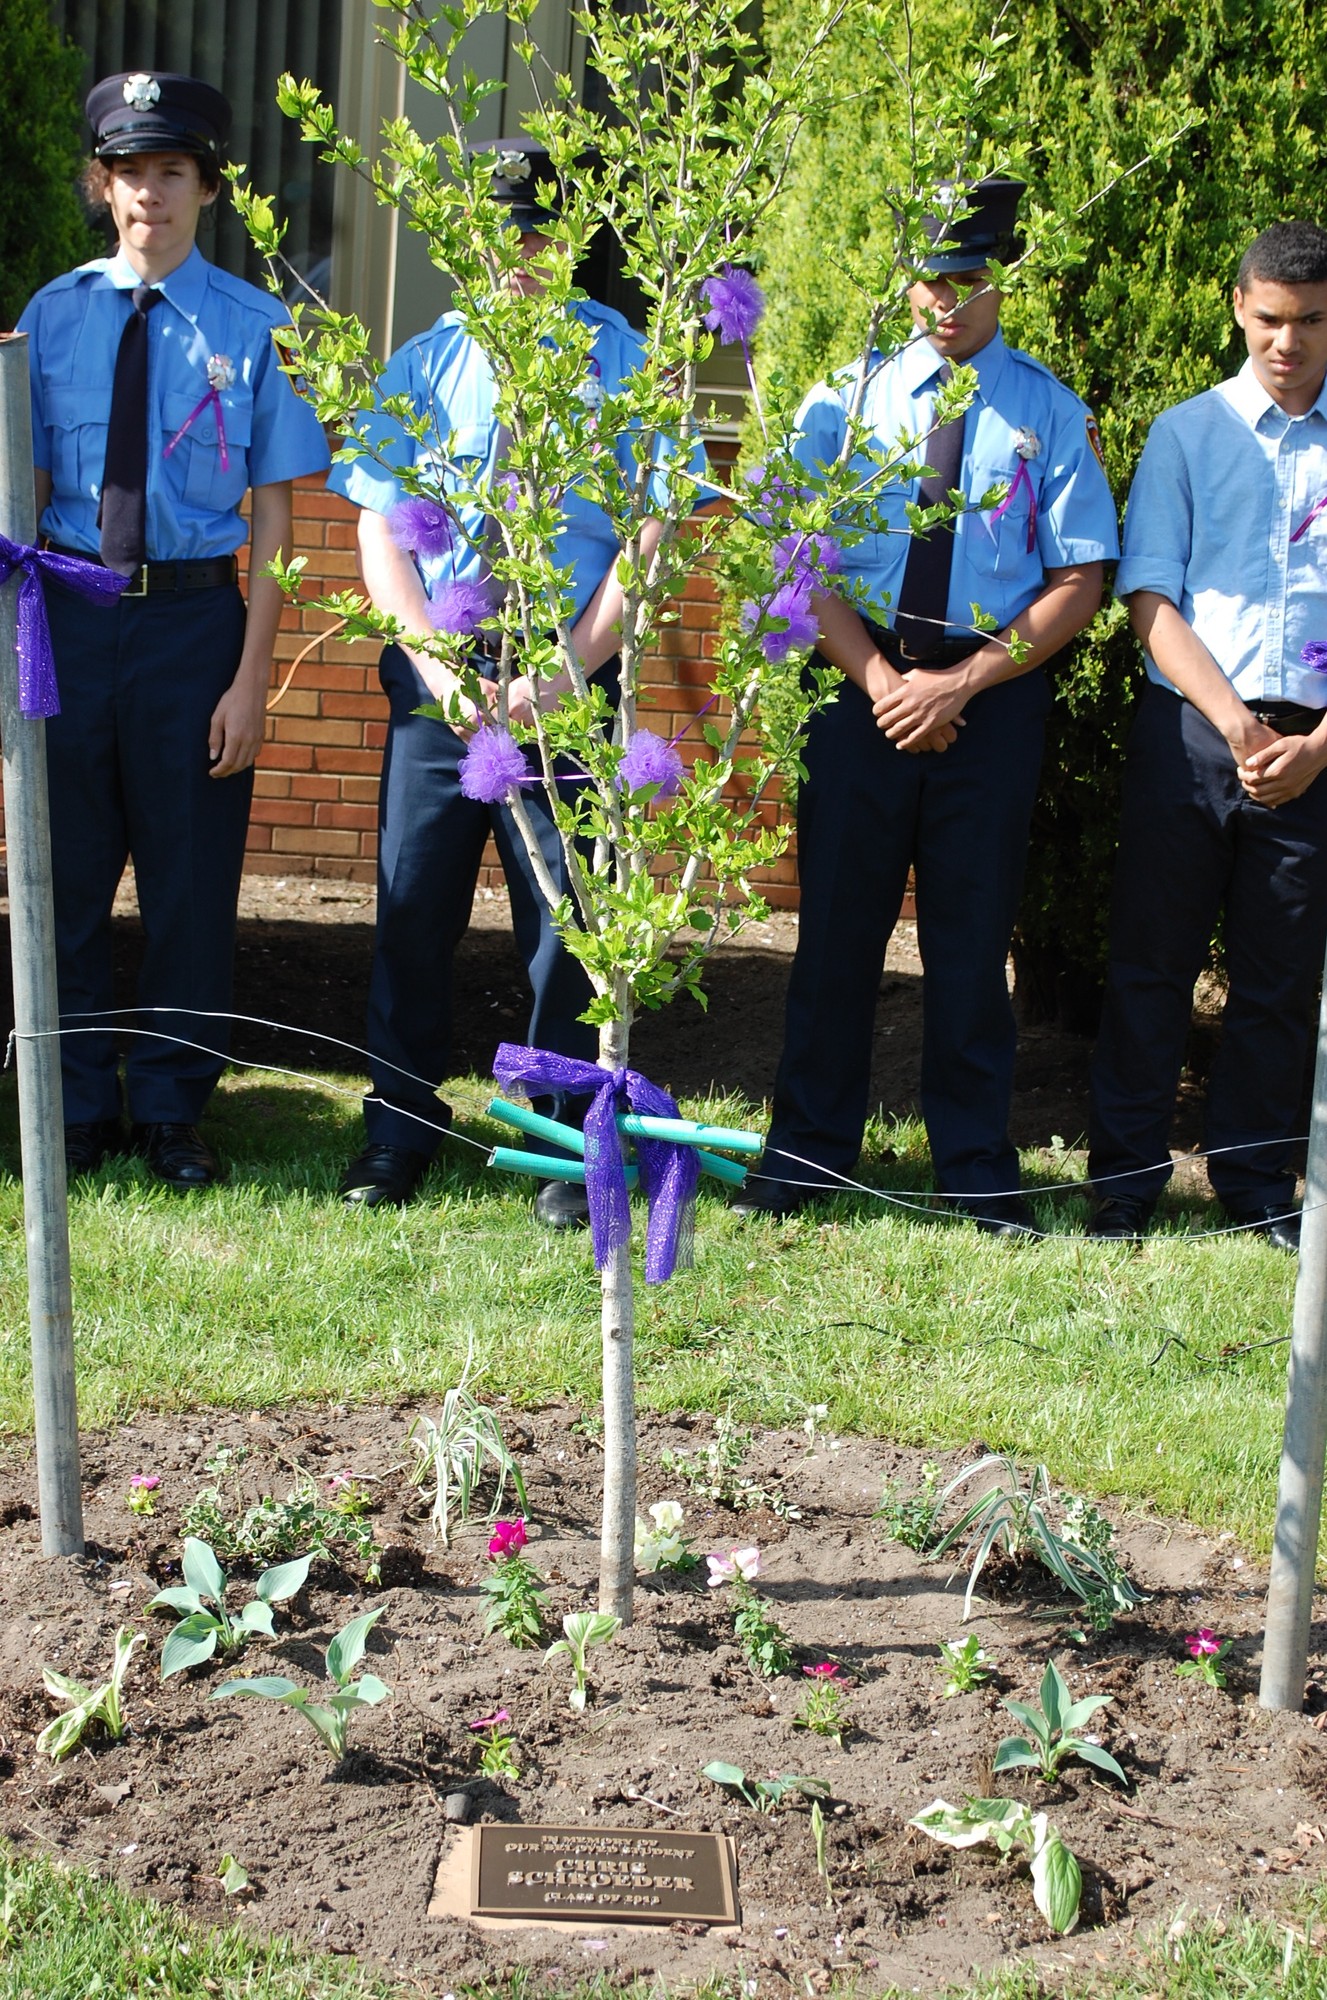 The tree in Schroeder’s honor was dedicated on May 15 at South High School. Members of the Junior Fire Department, which Schroeder belonged to, took part in the ceremony.